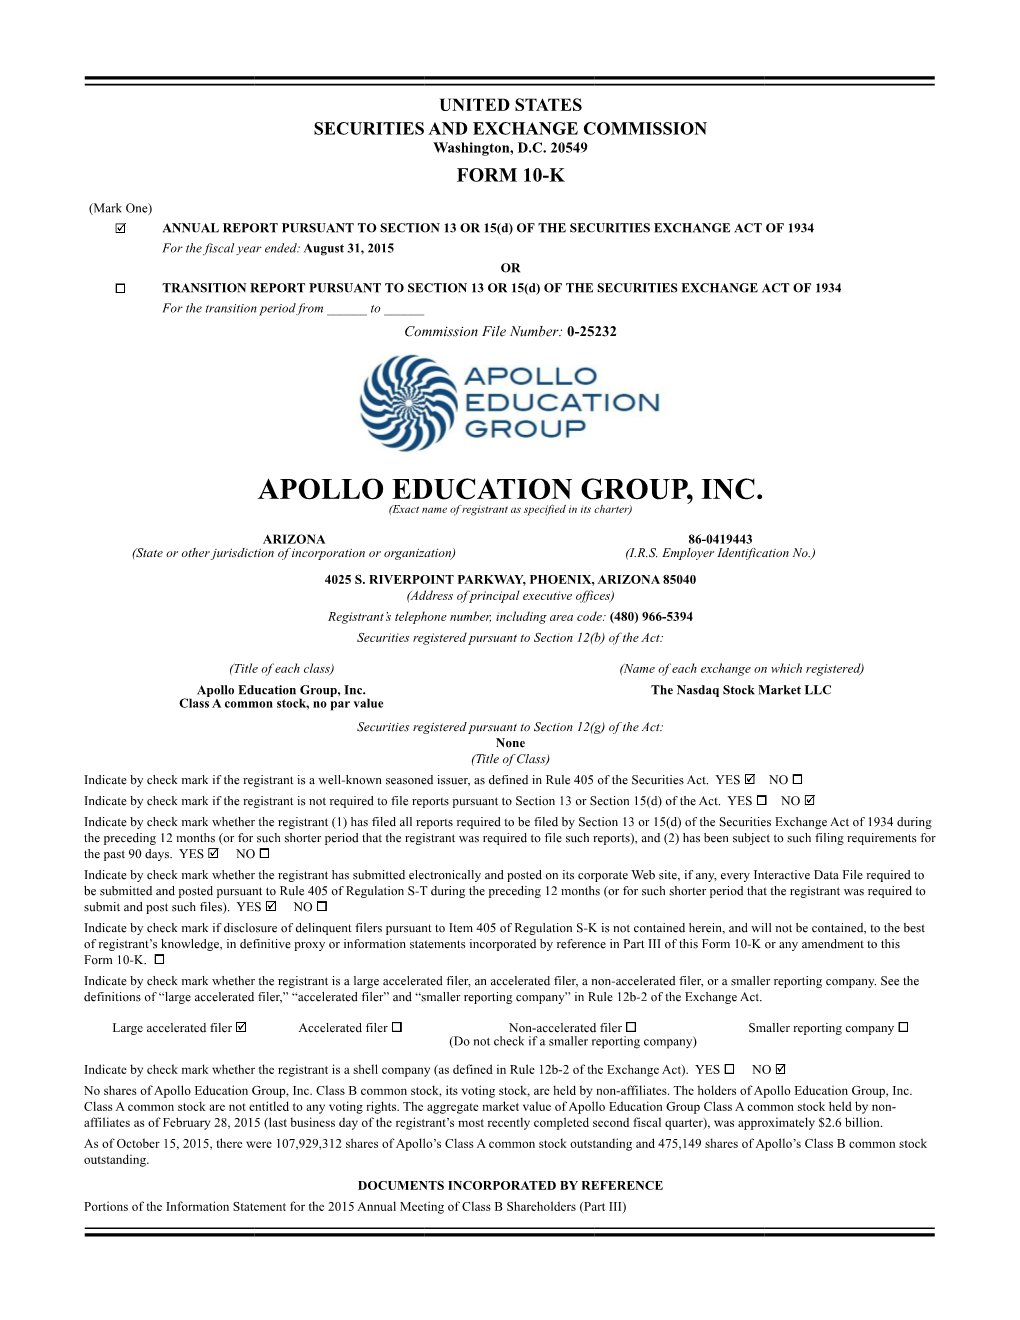 APOLLO EDUCATION GROUP, INC. (Exact Name of Registrant As Specified in Its Charter)